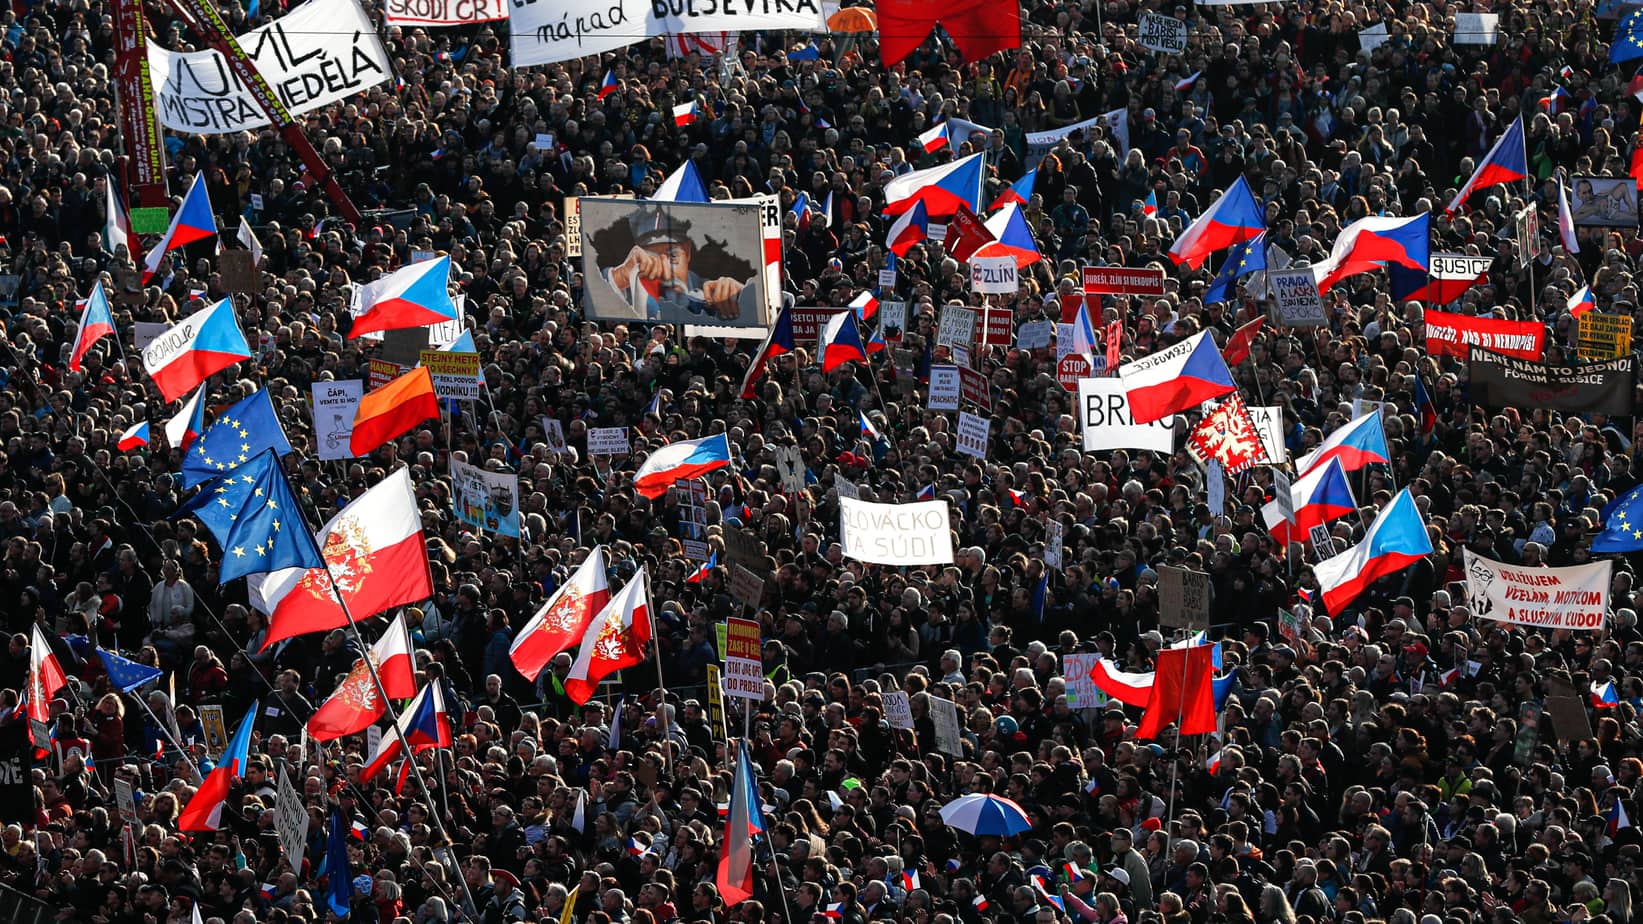 People take part in a large anti-government protest in Prague, Czech Republic, Saturday, Nov. 16, 2019.